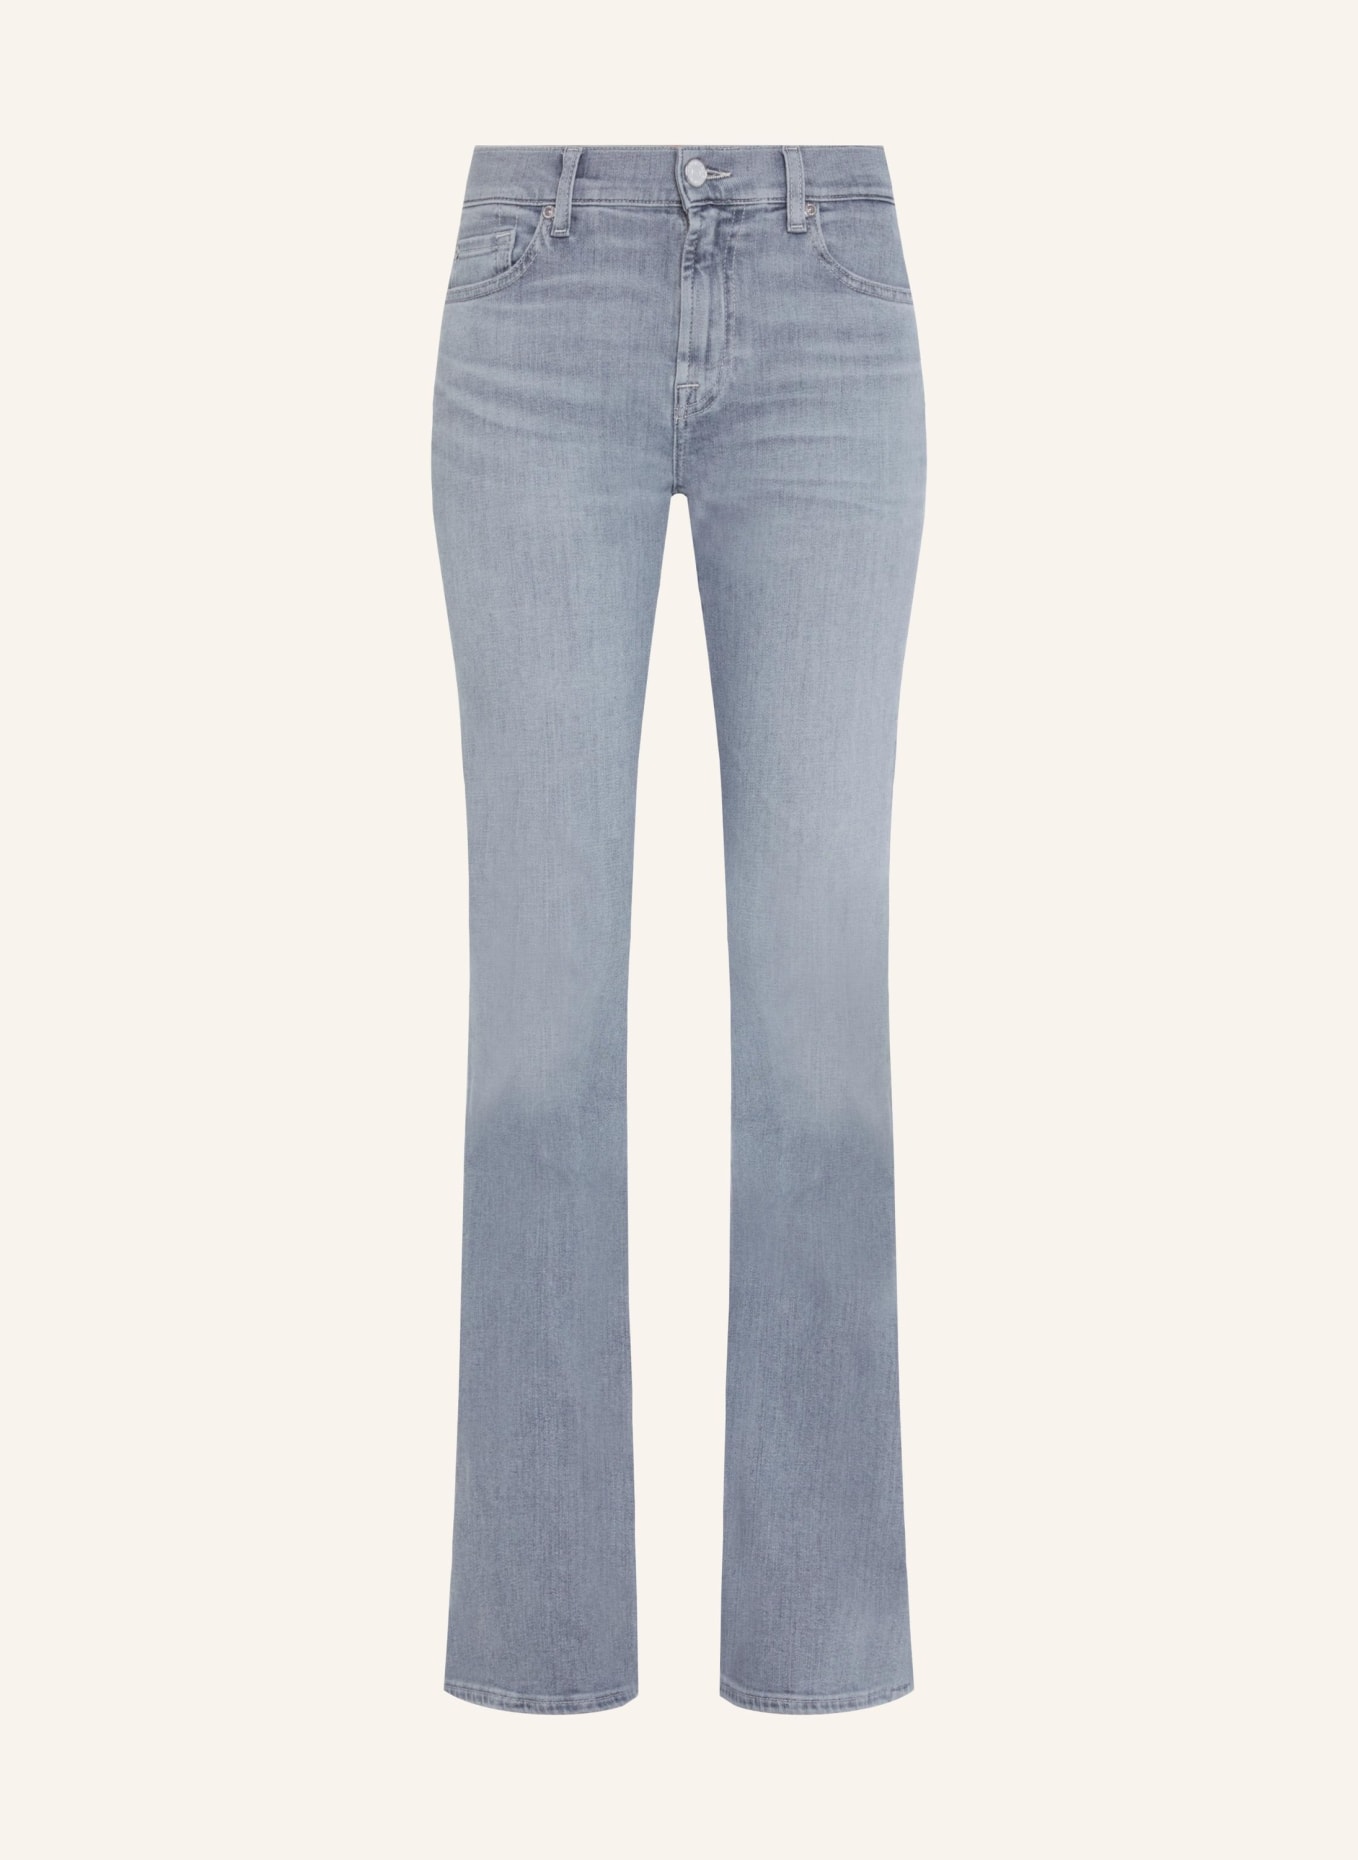 7 for all mankind Jeans BOOTCUT Bootcut fit, Farbe: GRAU (Bild 1)